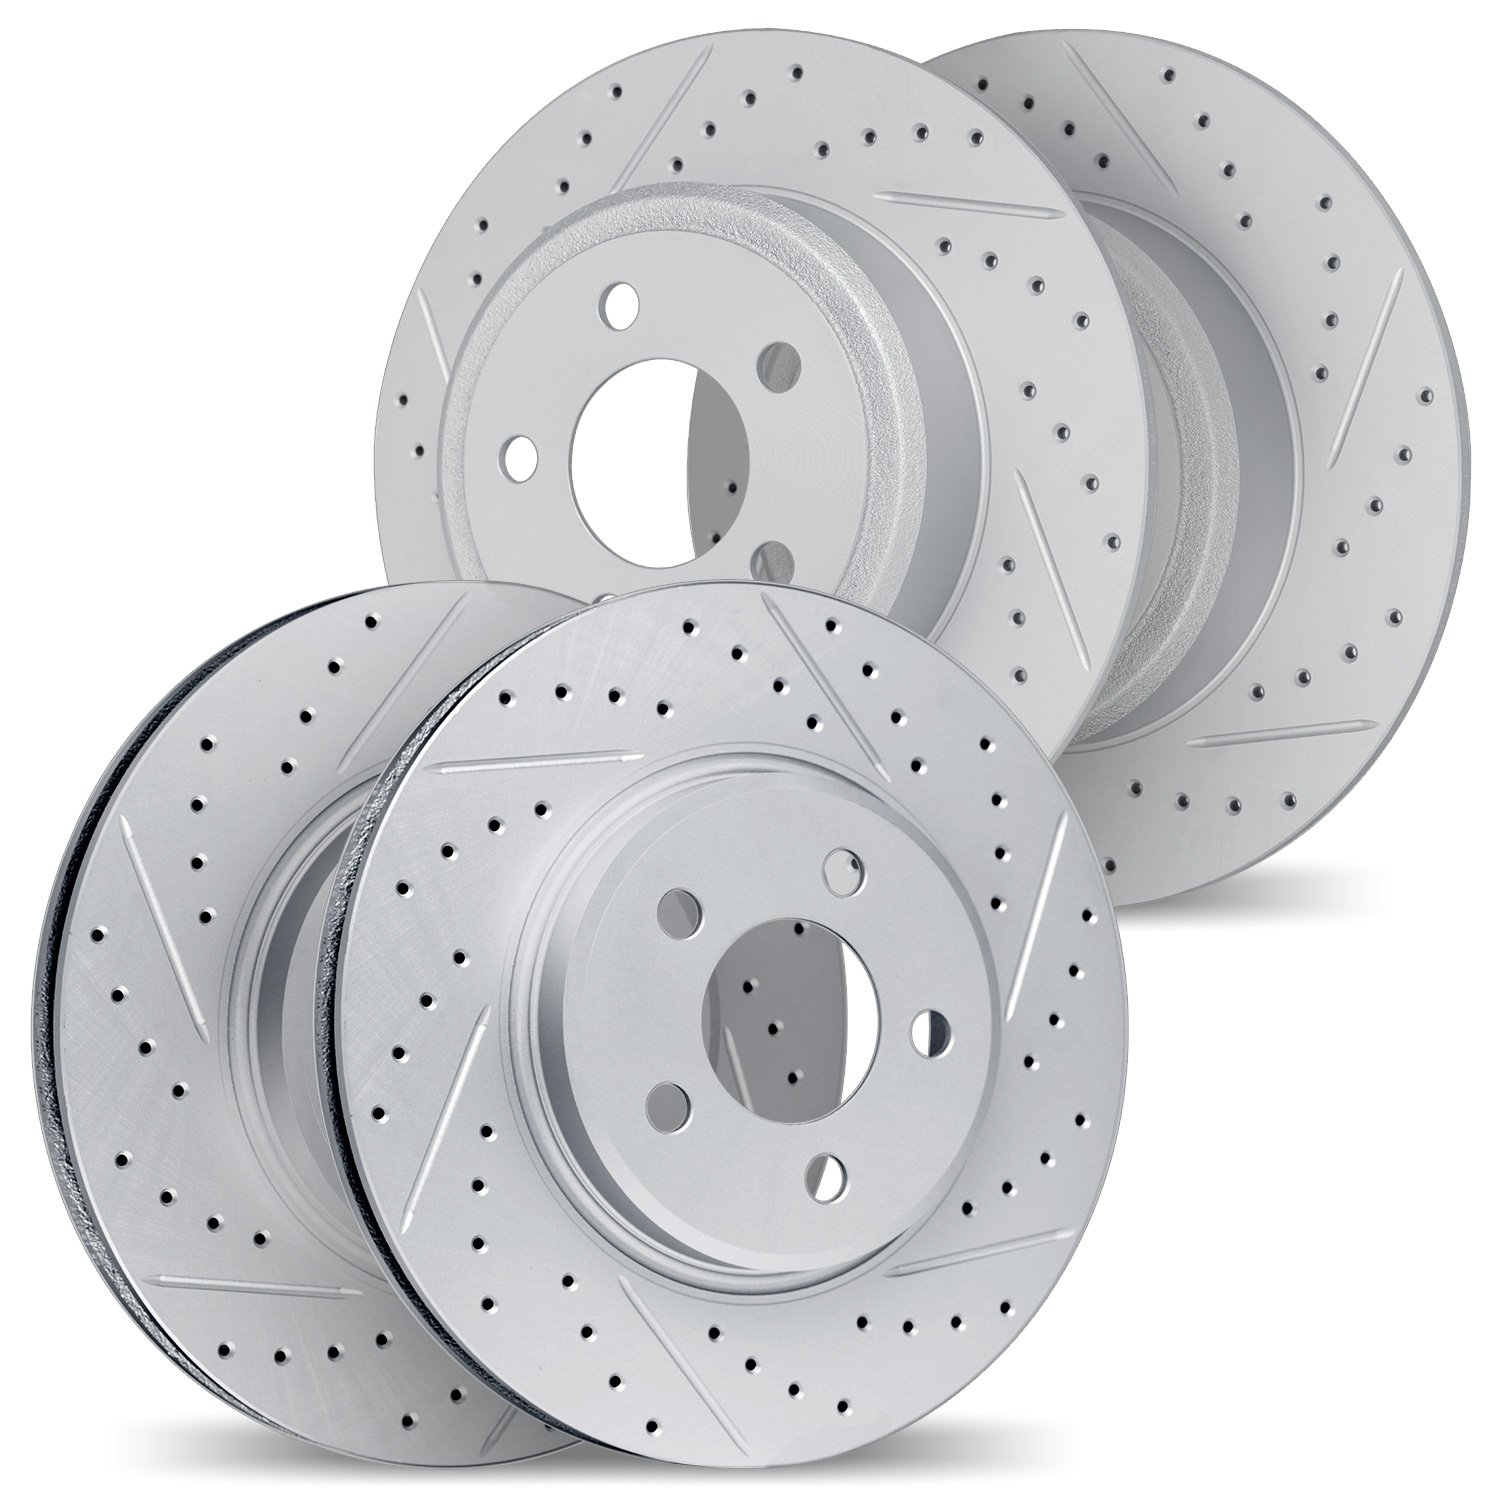 2004-42020 Geoperformance Drilled/Slotted Brake Rotors, 2003-2006 Mopar, Position: Front and Rear